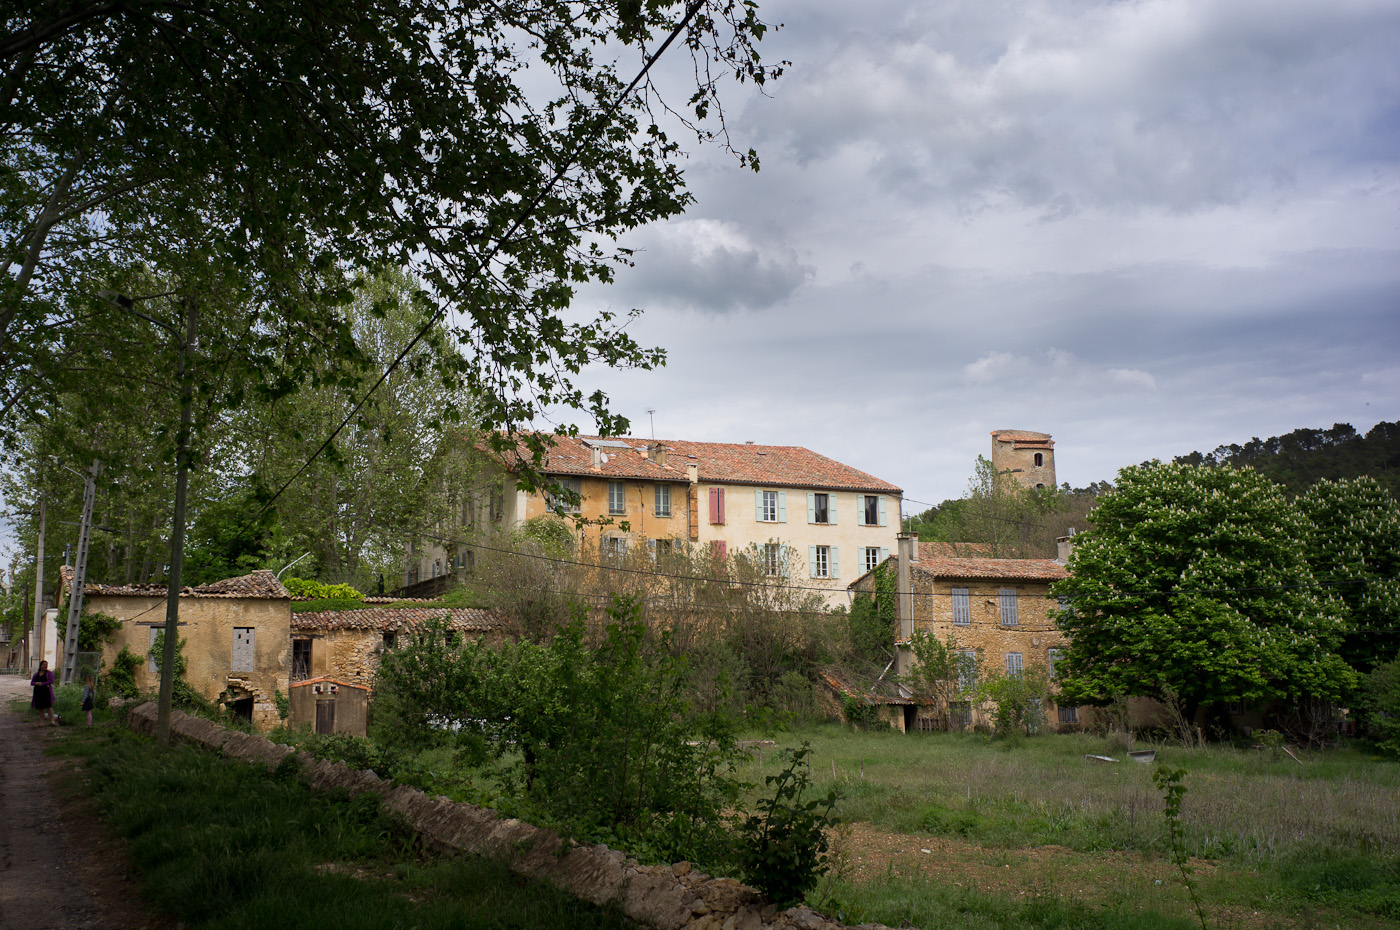 An old village in Provence. Sony NEX-5n